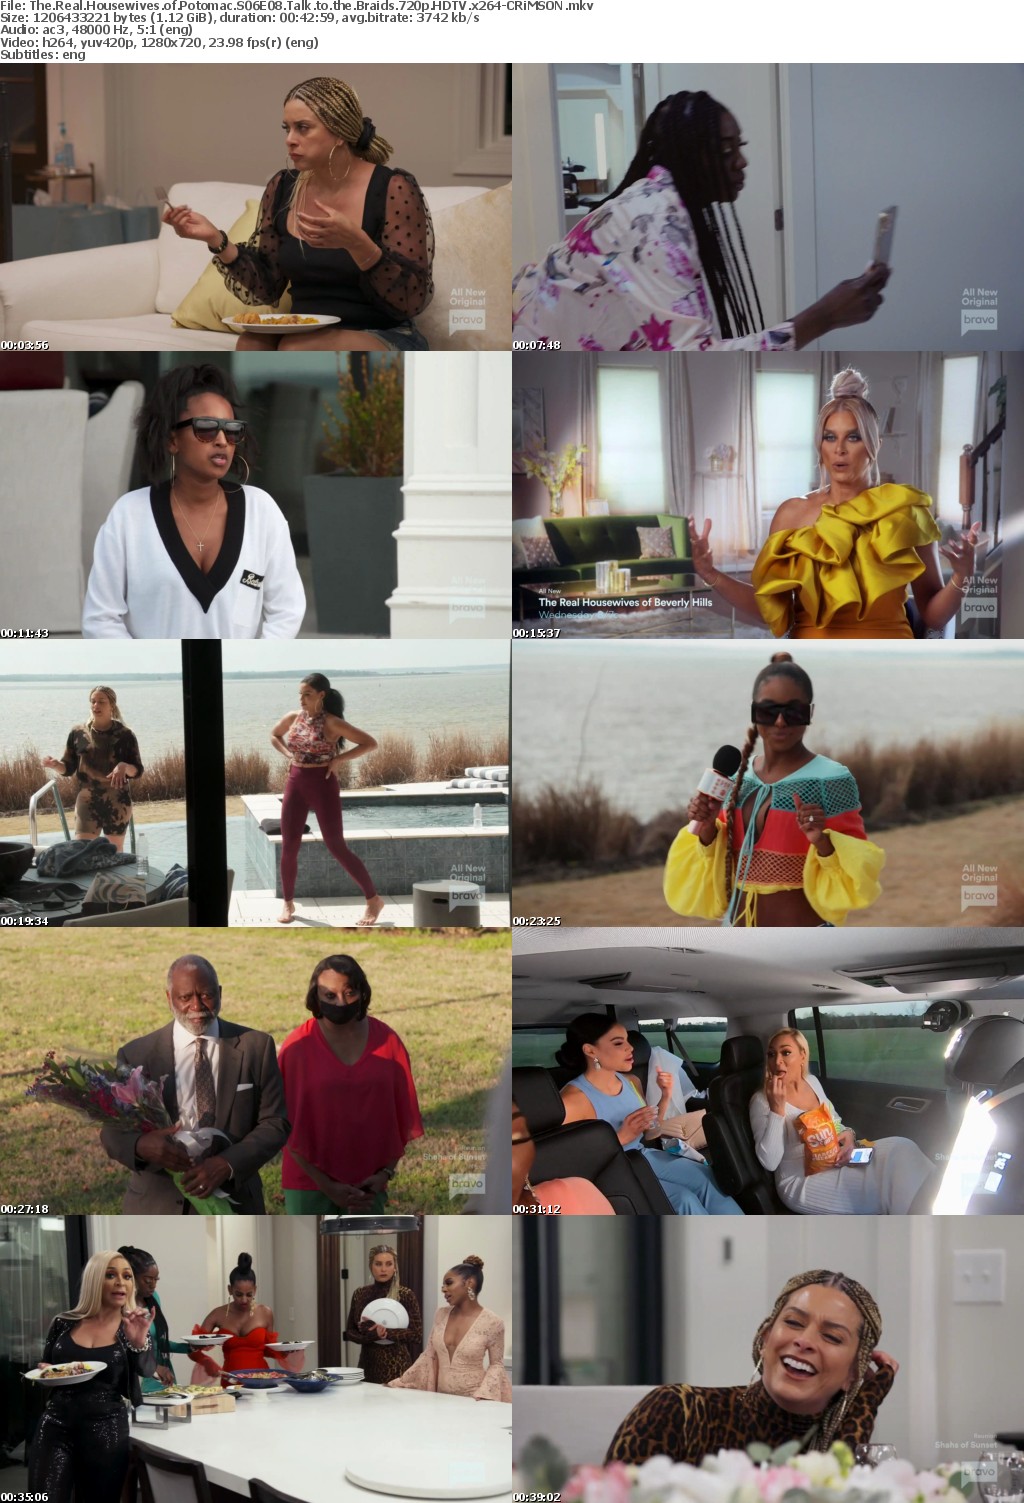 The Real Housewives of Potomac S06E08 Talk to the Braids 720p HDTV x264-CRiMSON